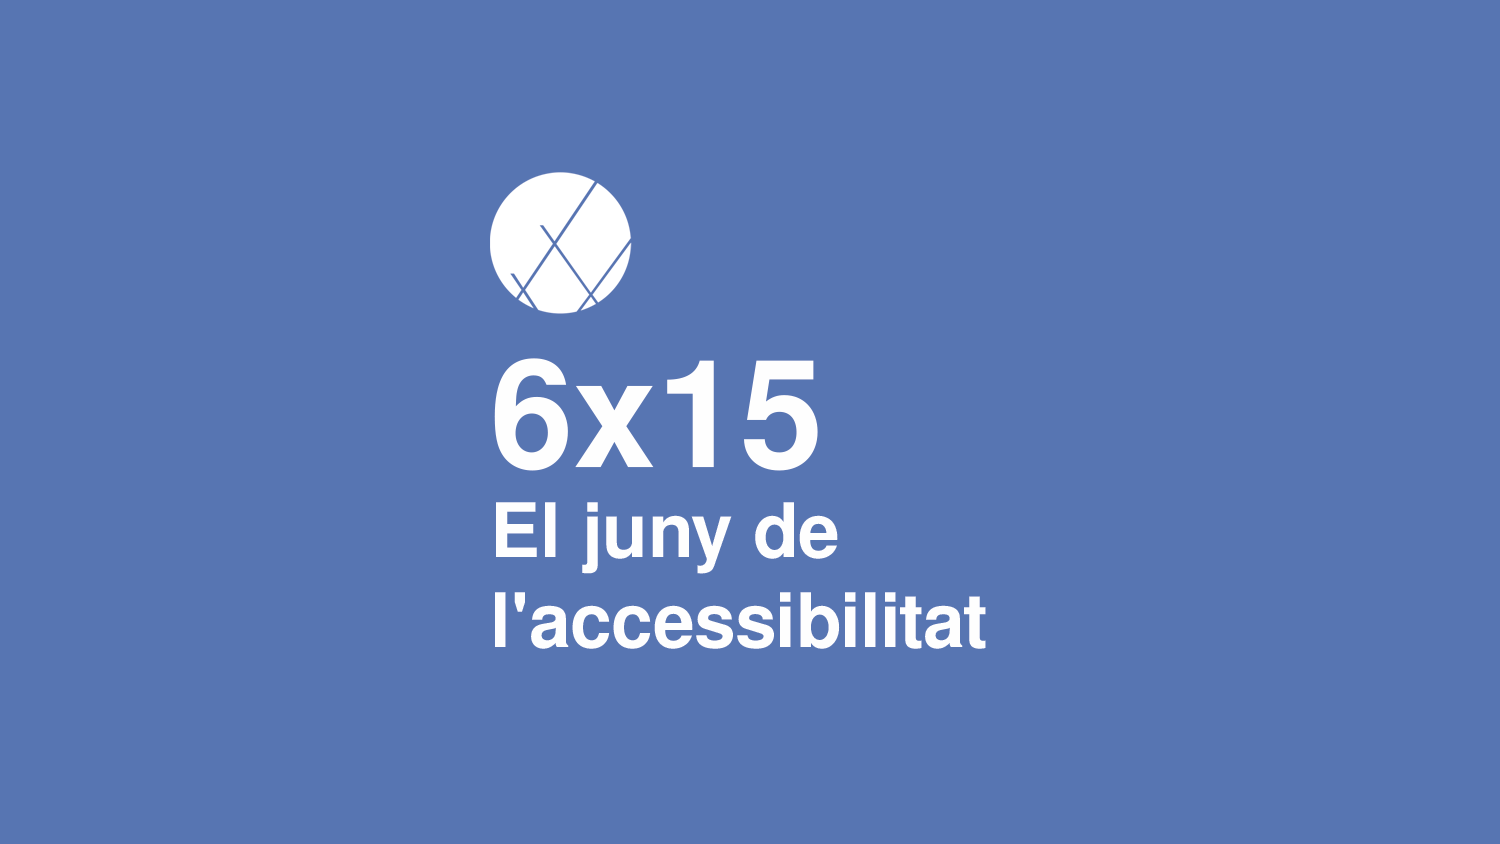 Cover photo of the 6x15: Accessibility June